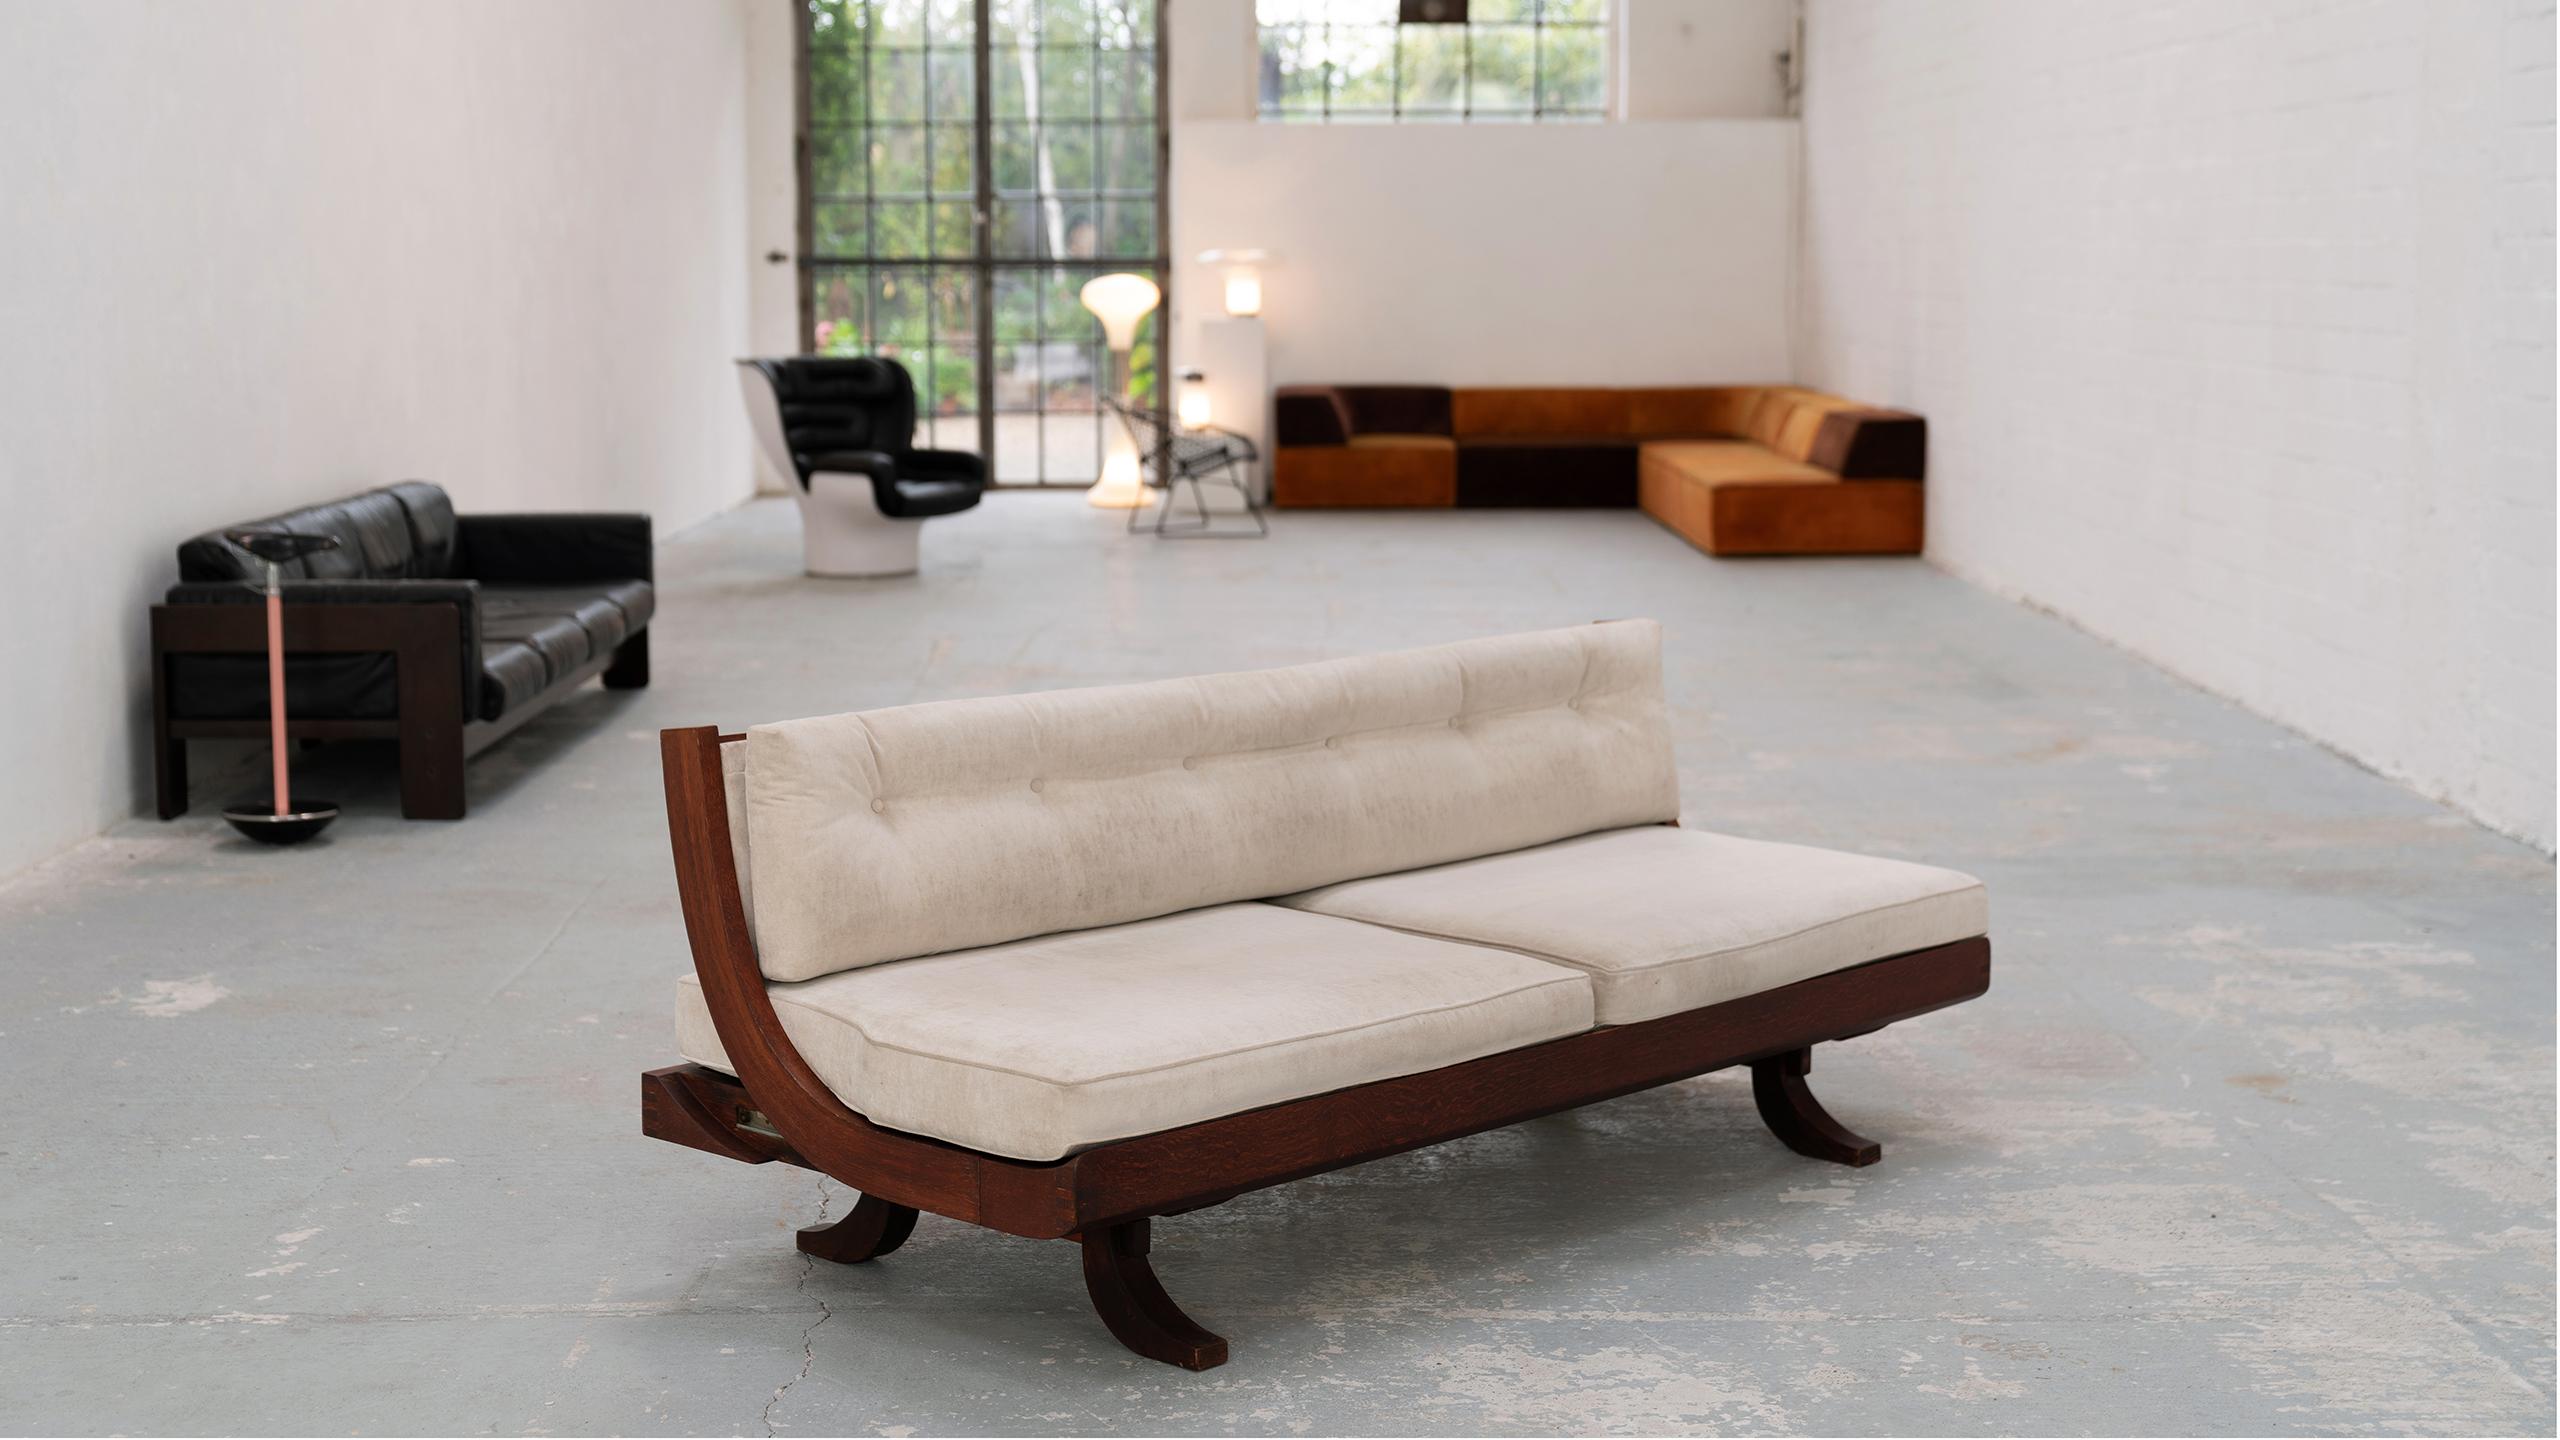 Brazilian Daybed & Sofa, 1966, Sophisticated Wood Details, Lounge & Relax 9